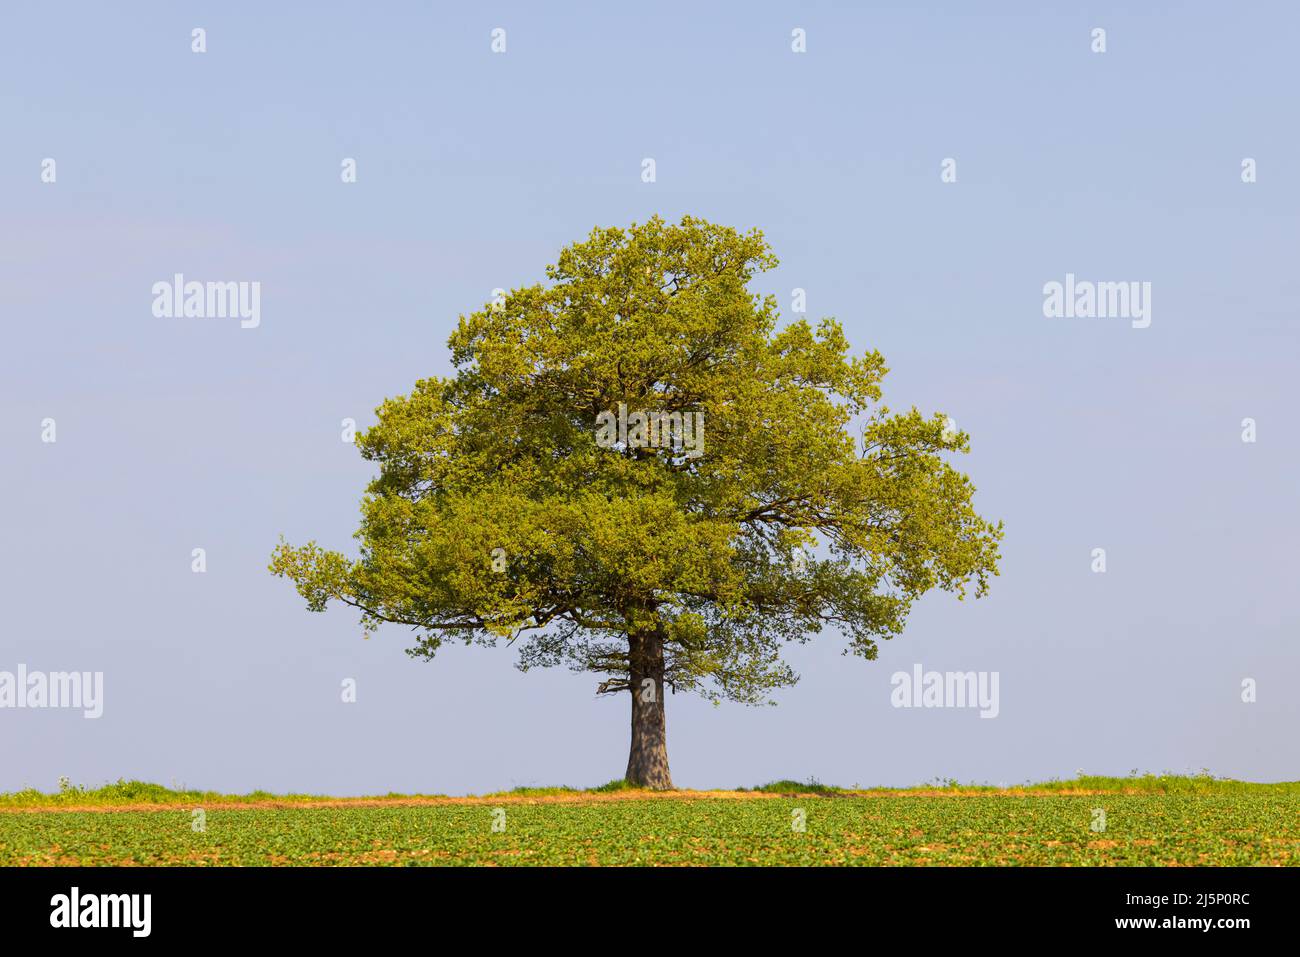 Solitary isolated Oak tree on the horizon in a field, with a plain blue sky background. UK Stock Photo